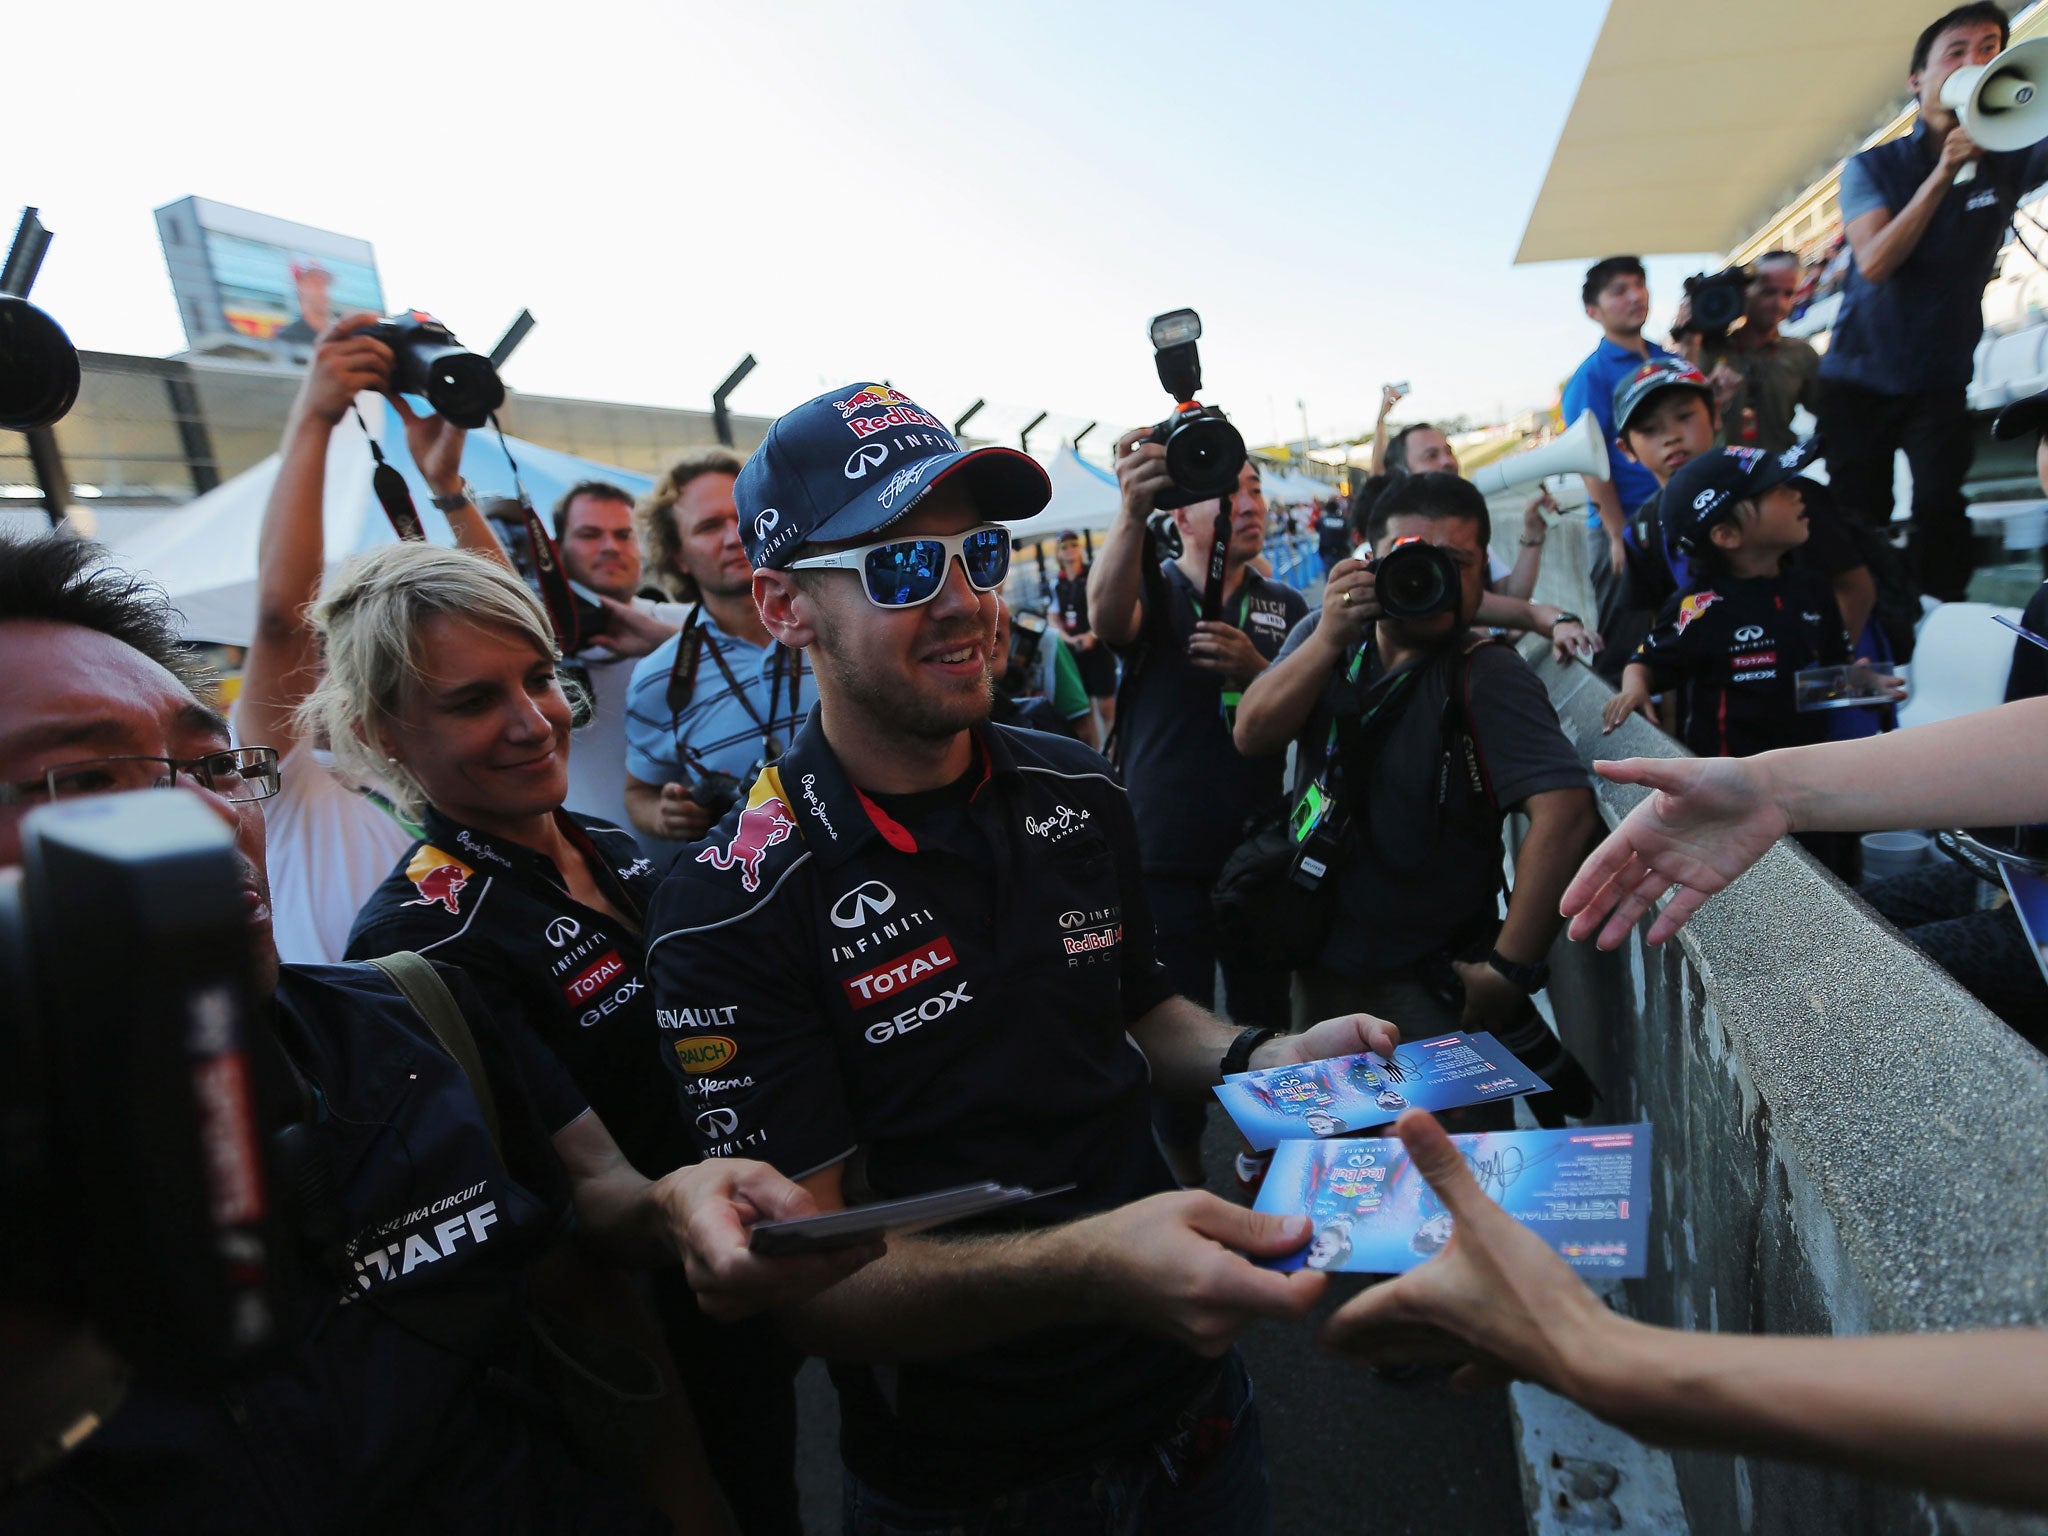 Sebastian Vettel is surrounded by fans ahead of the Japanese Grand Prix last month